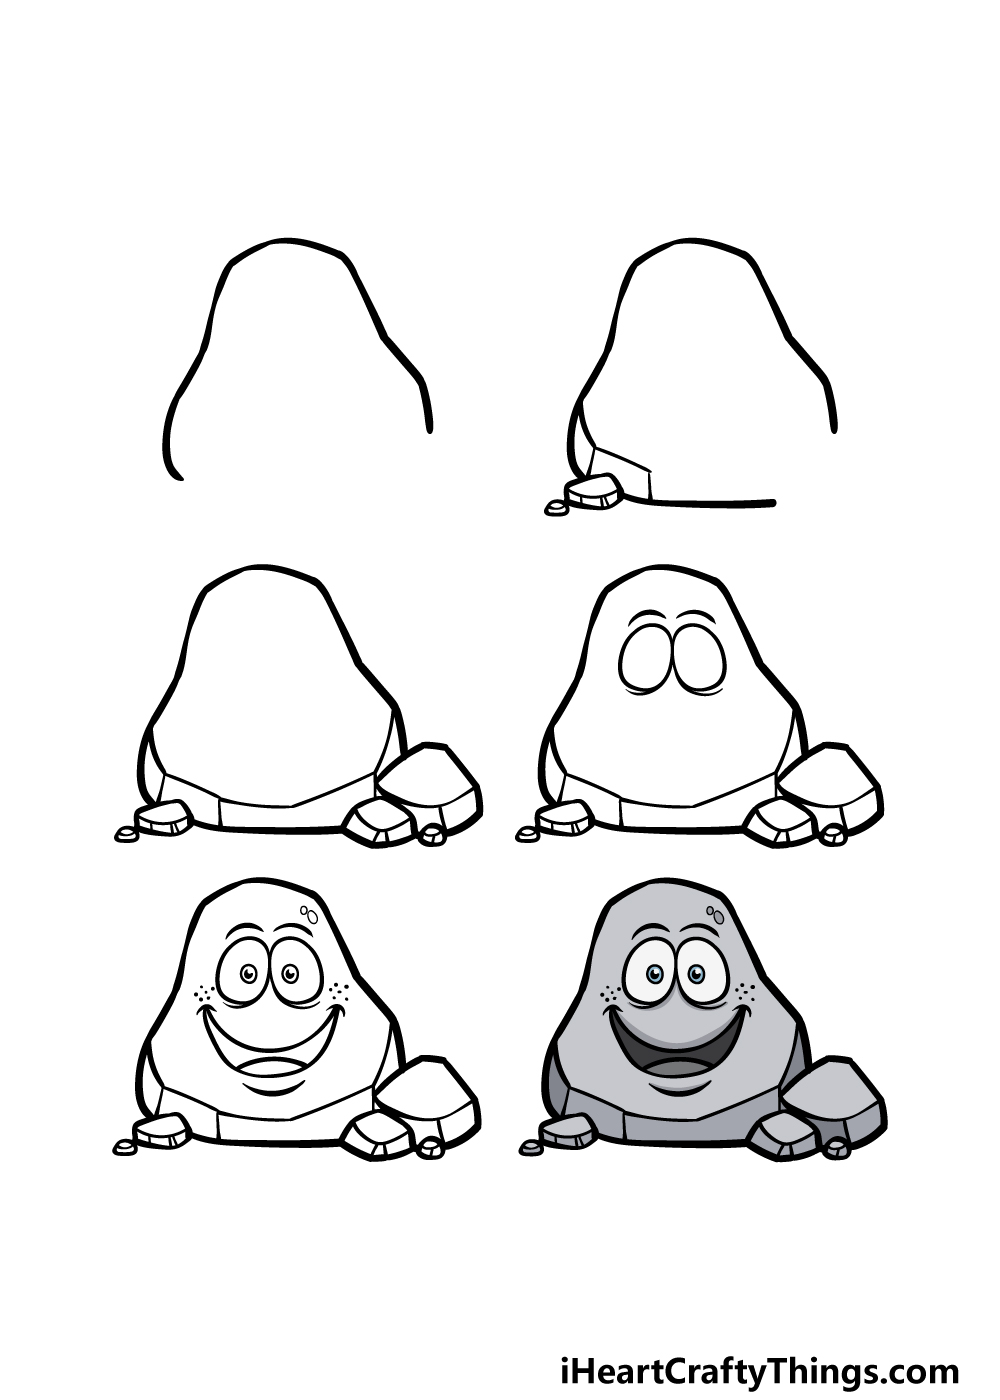 how to draw a cartoon rock in 6 steps